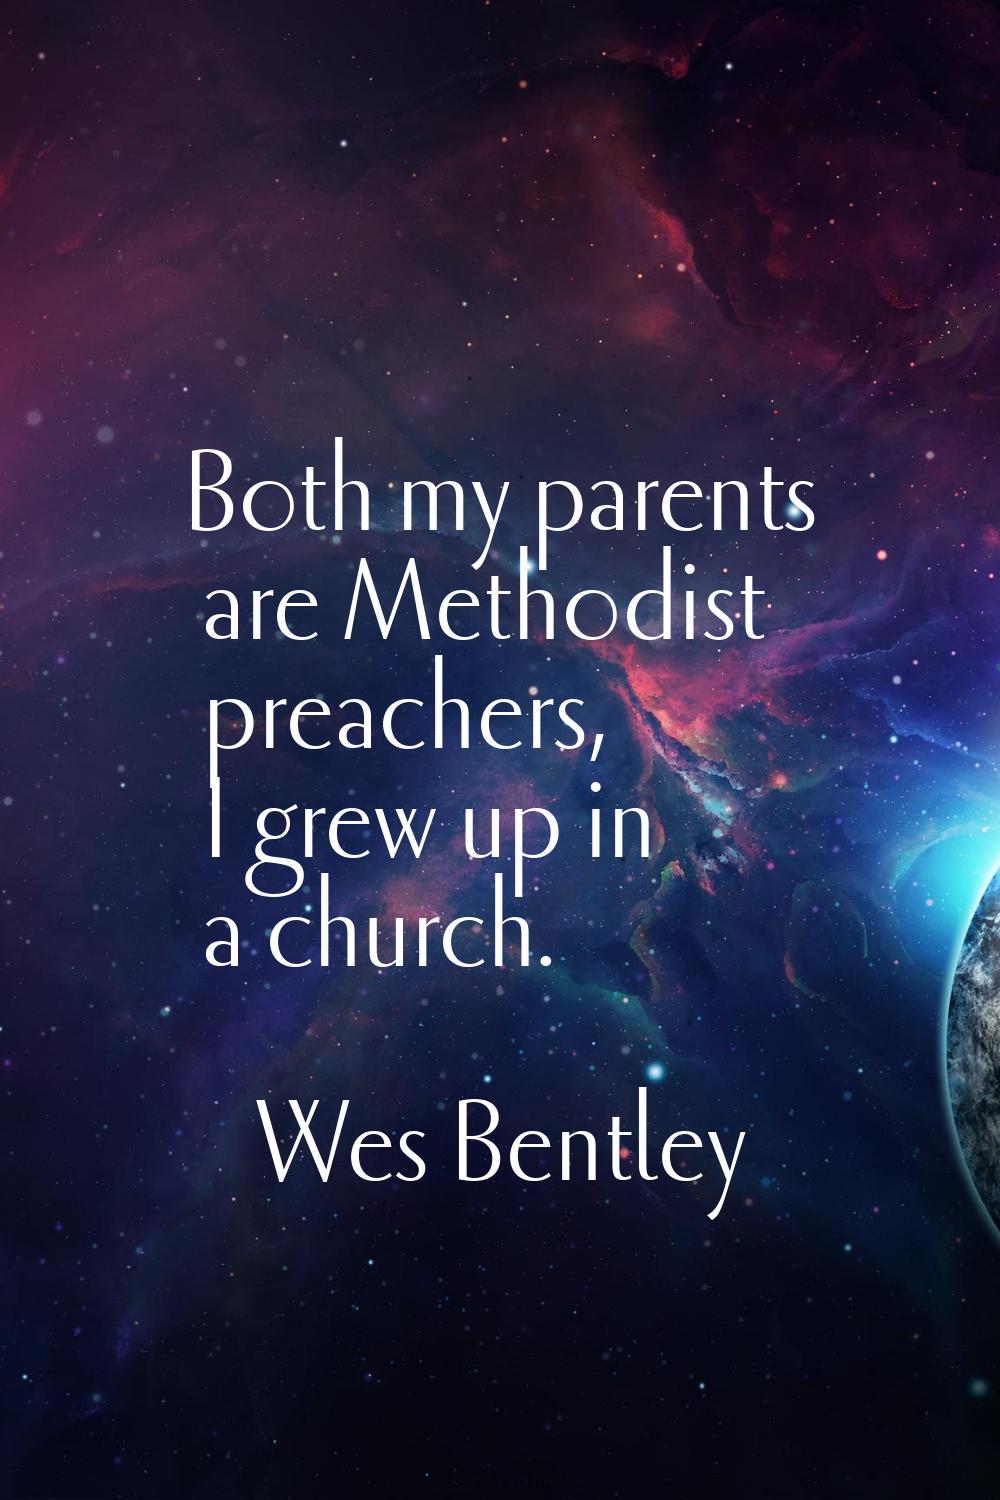 Both my parents are Methodist preachers, I grew up in a church.